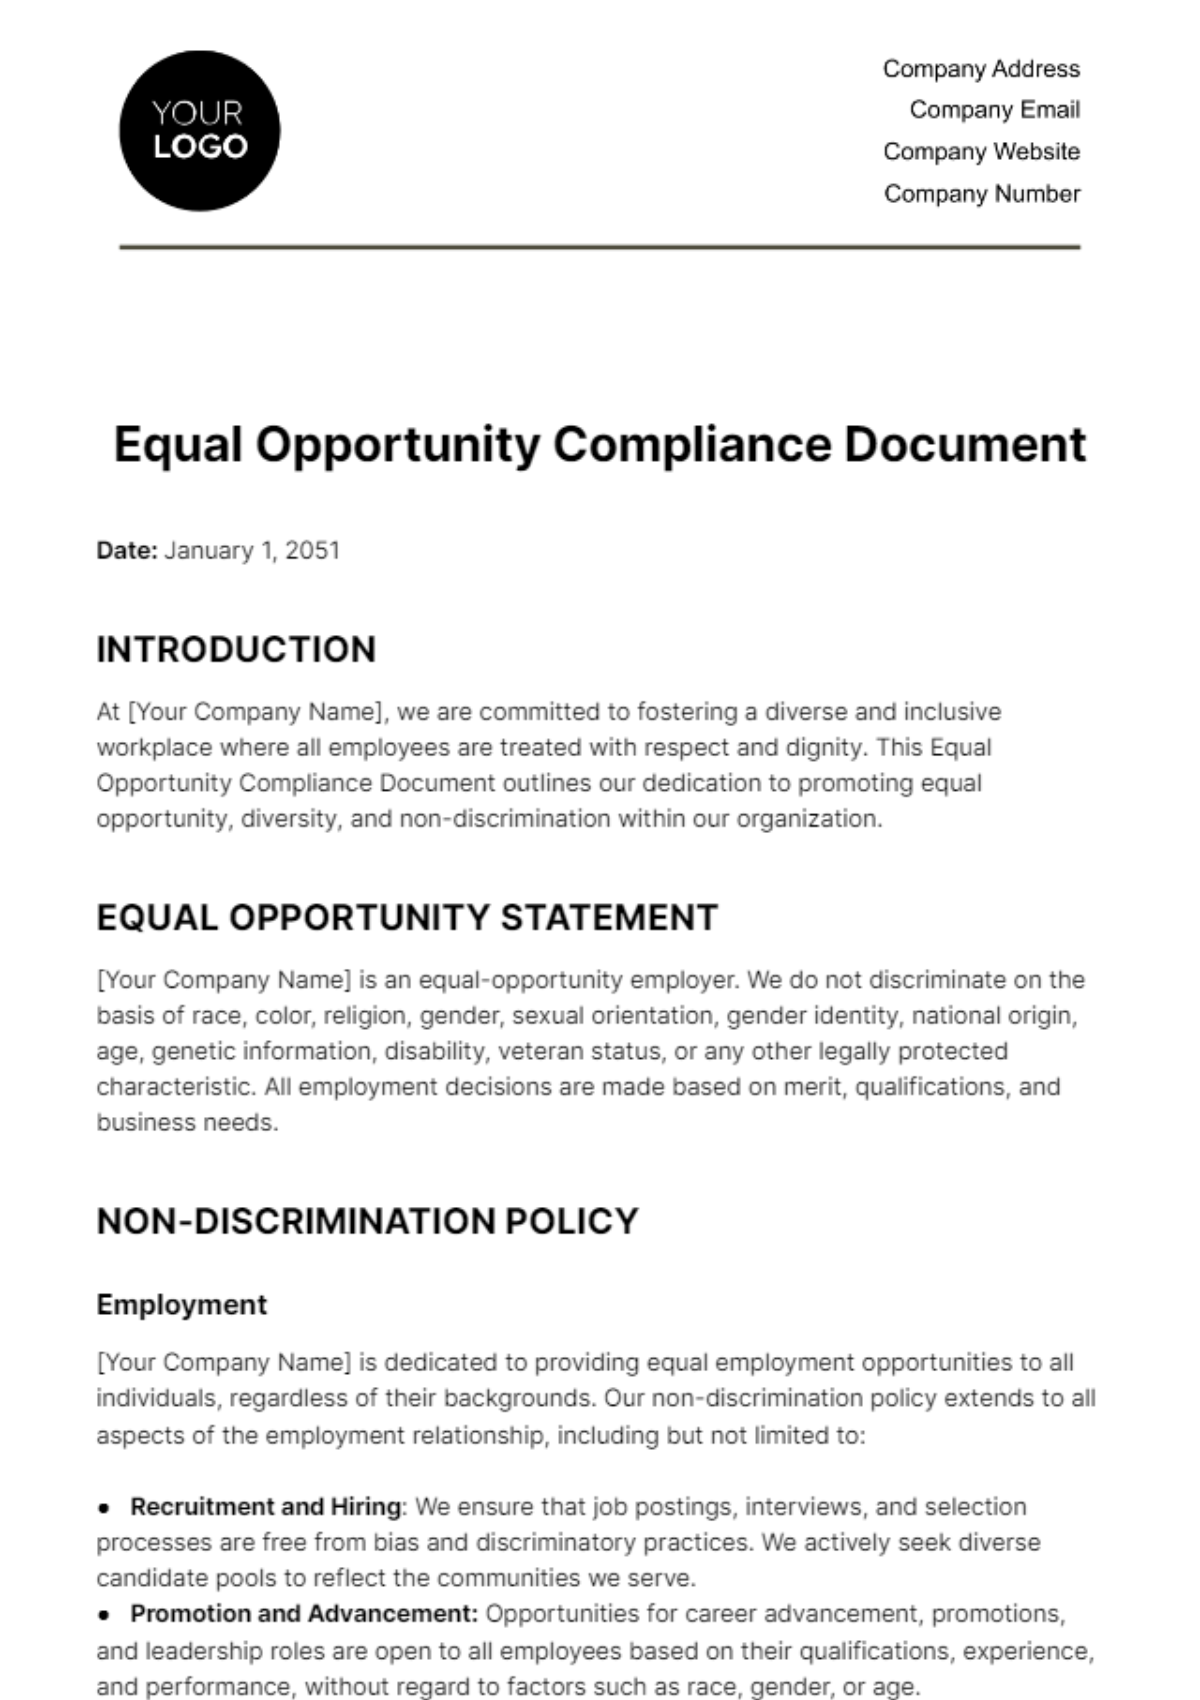 Equal Opportunity Compliance Document HR Template